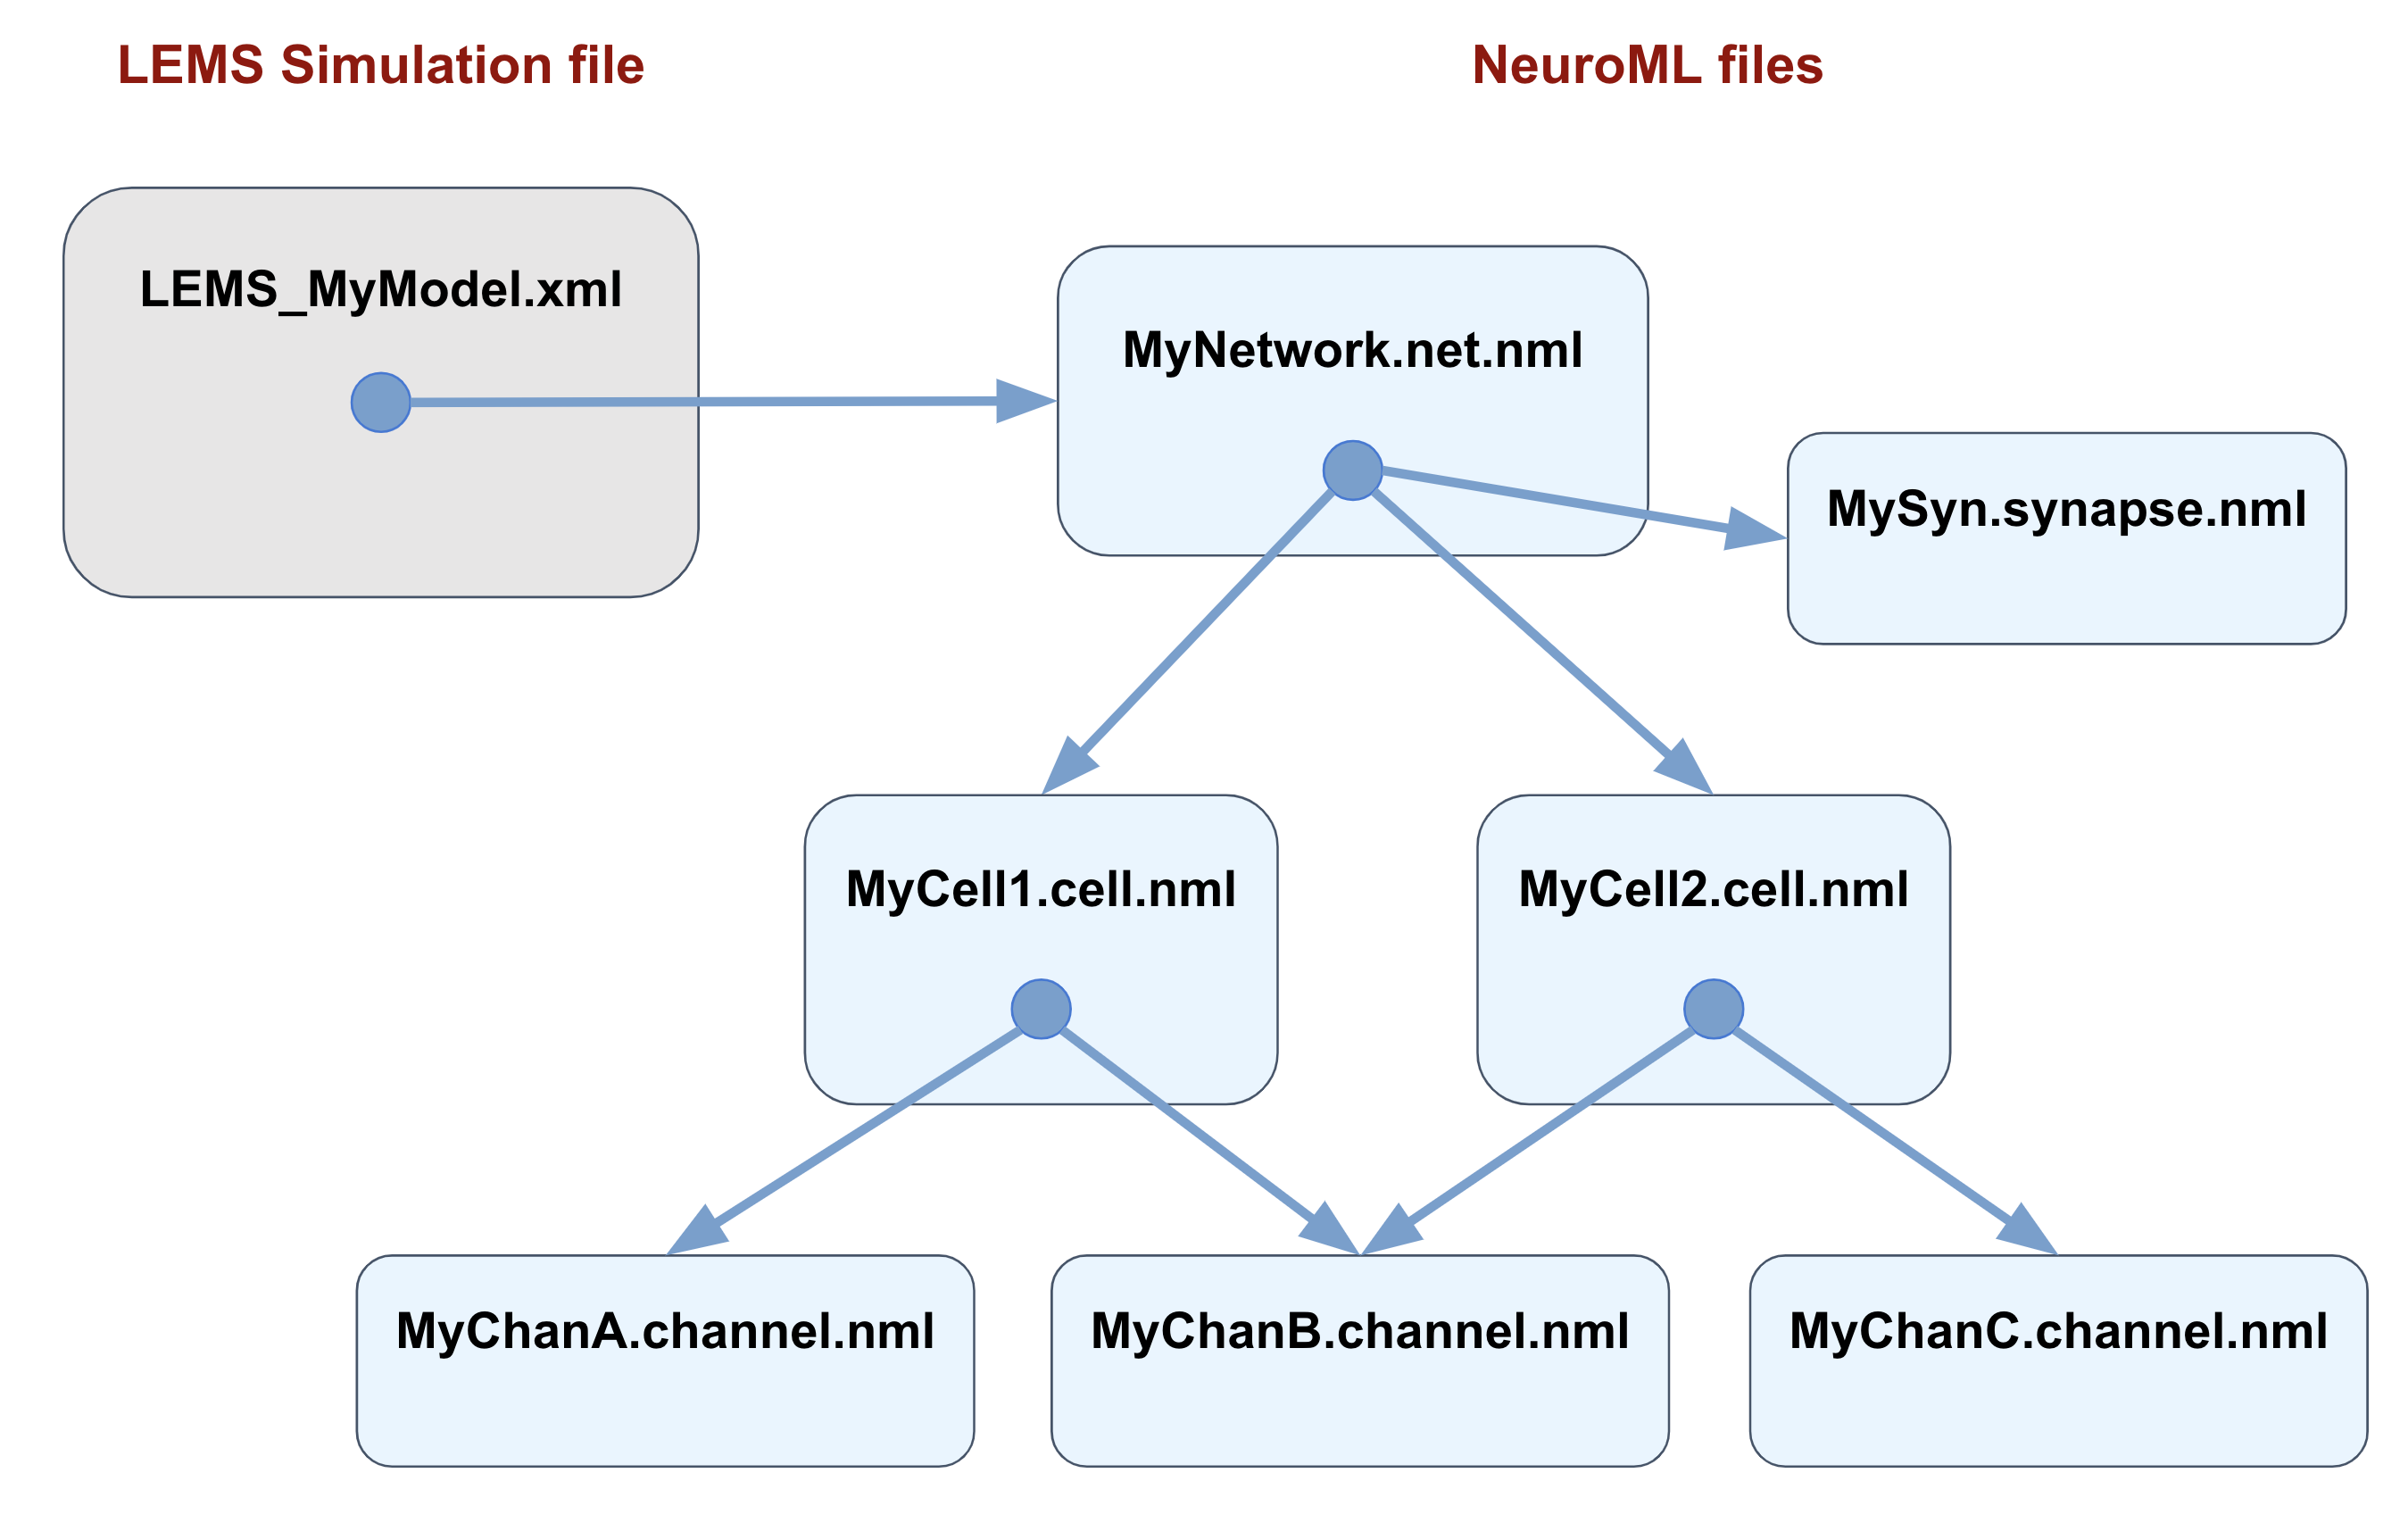 LEMS Simulation file and NeuroML file